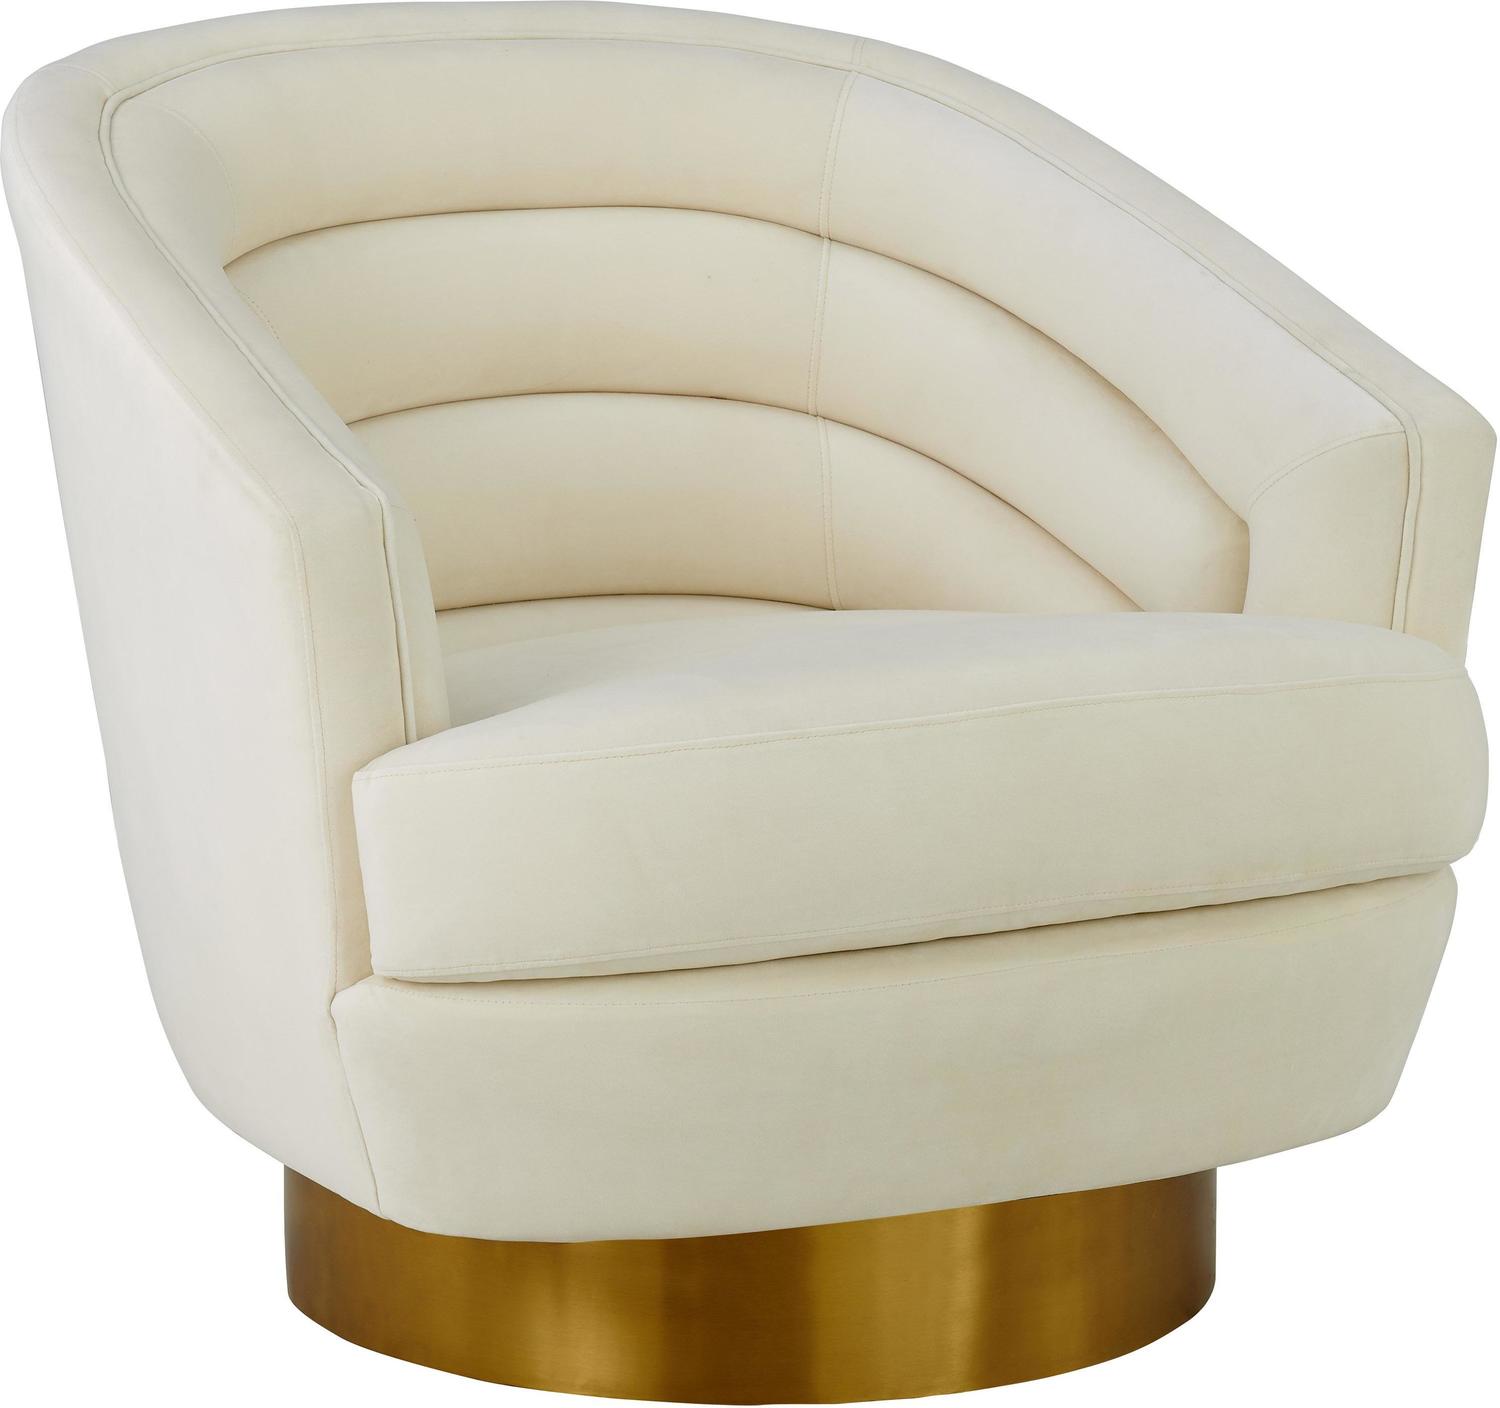 modern chair lounge Contemporary Design Furniture Accent Chairs Cream